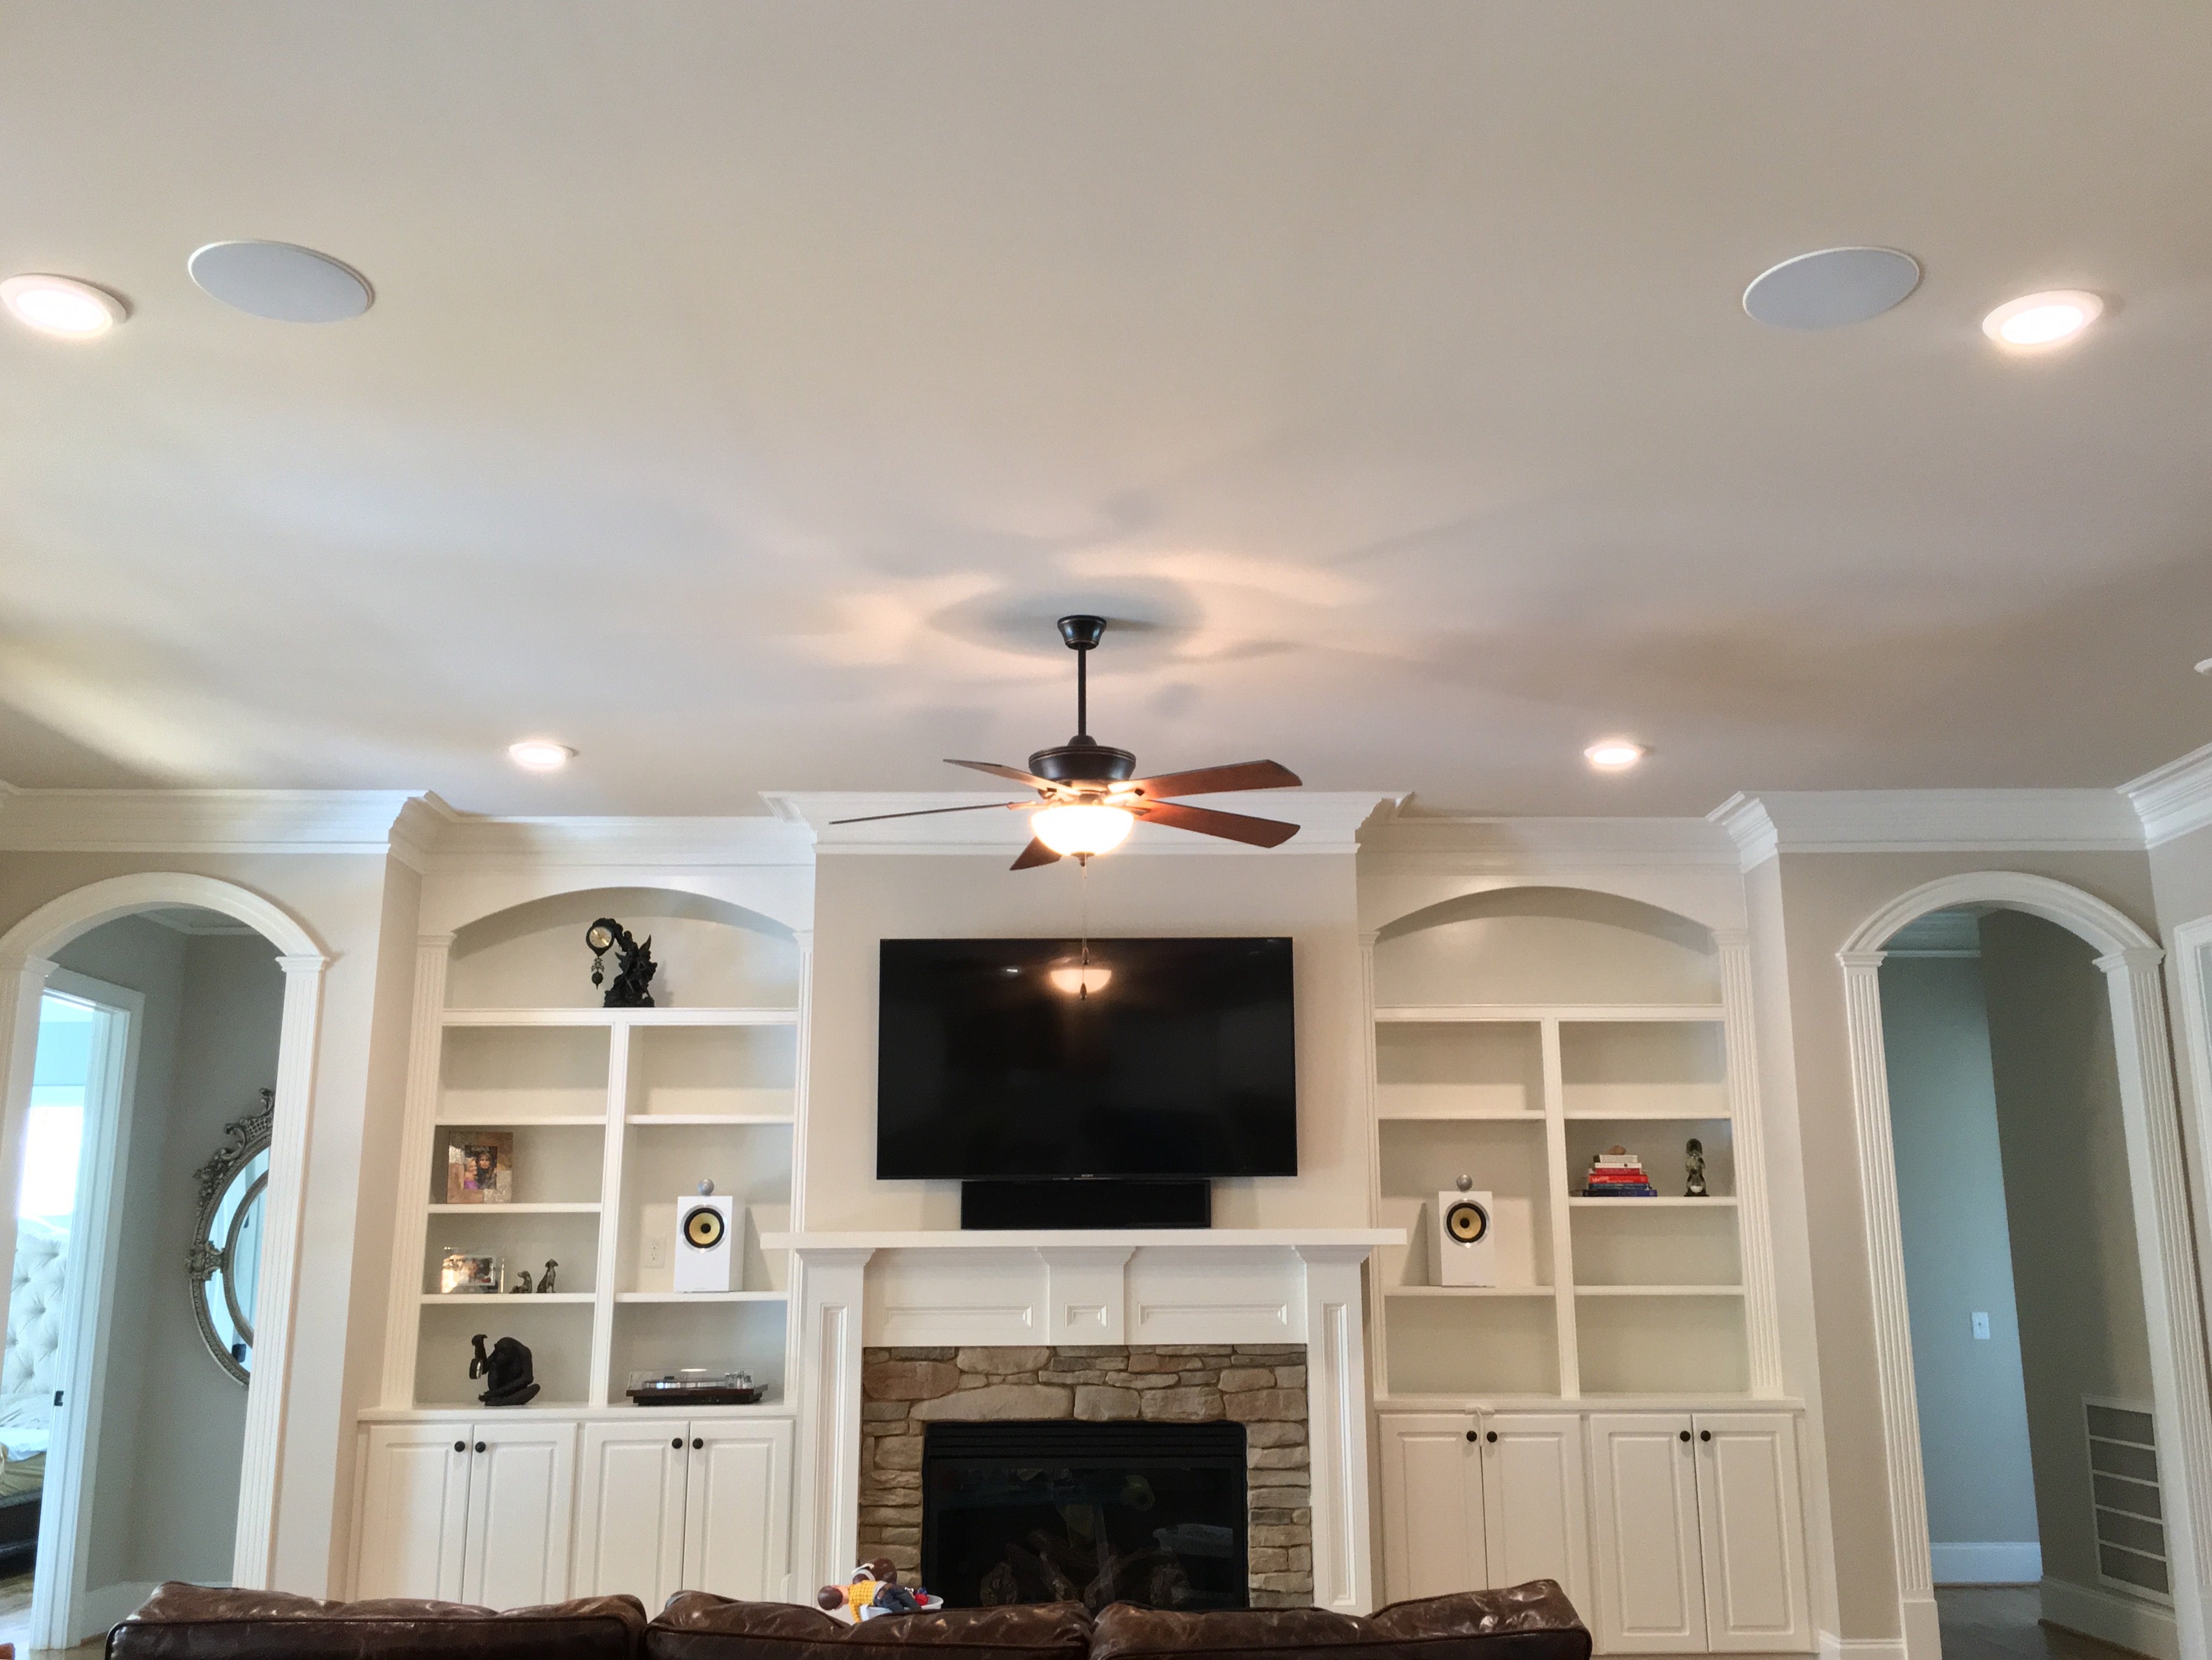 A living room with ceiling fan, recessed lights, mounted TV above a fireplace, and white built-in shelves.